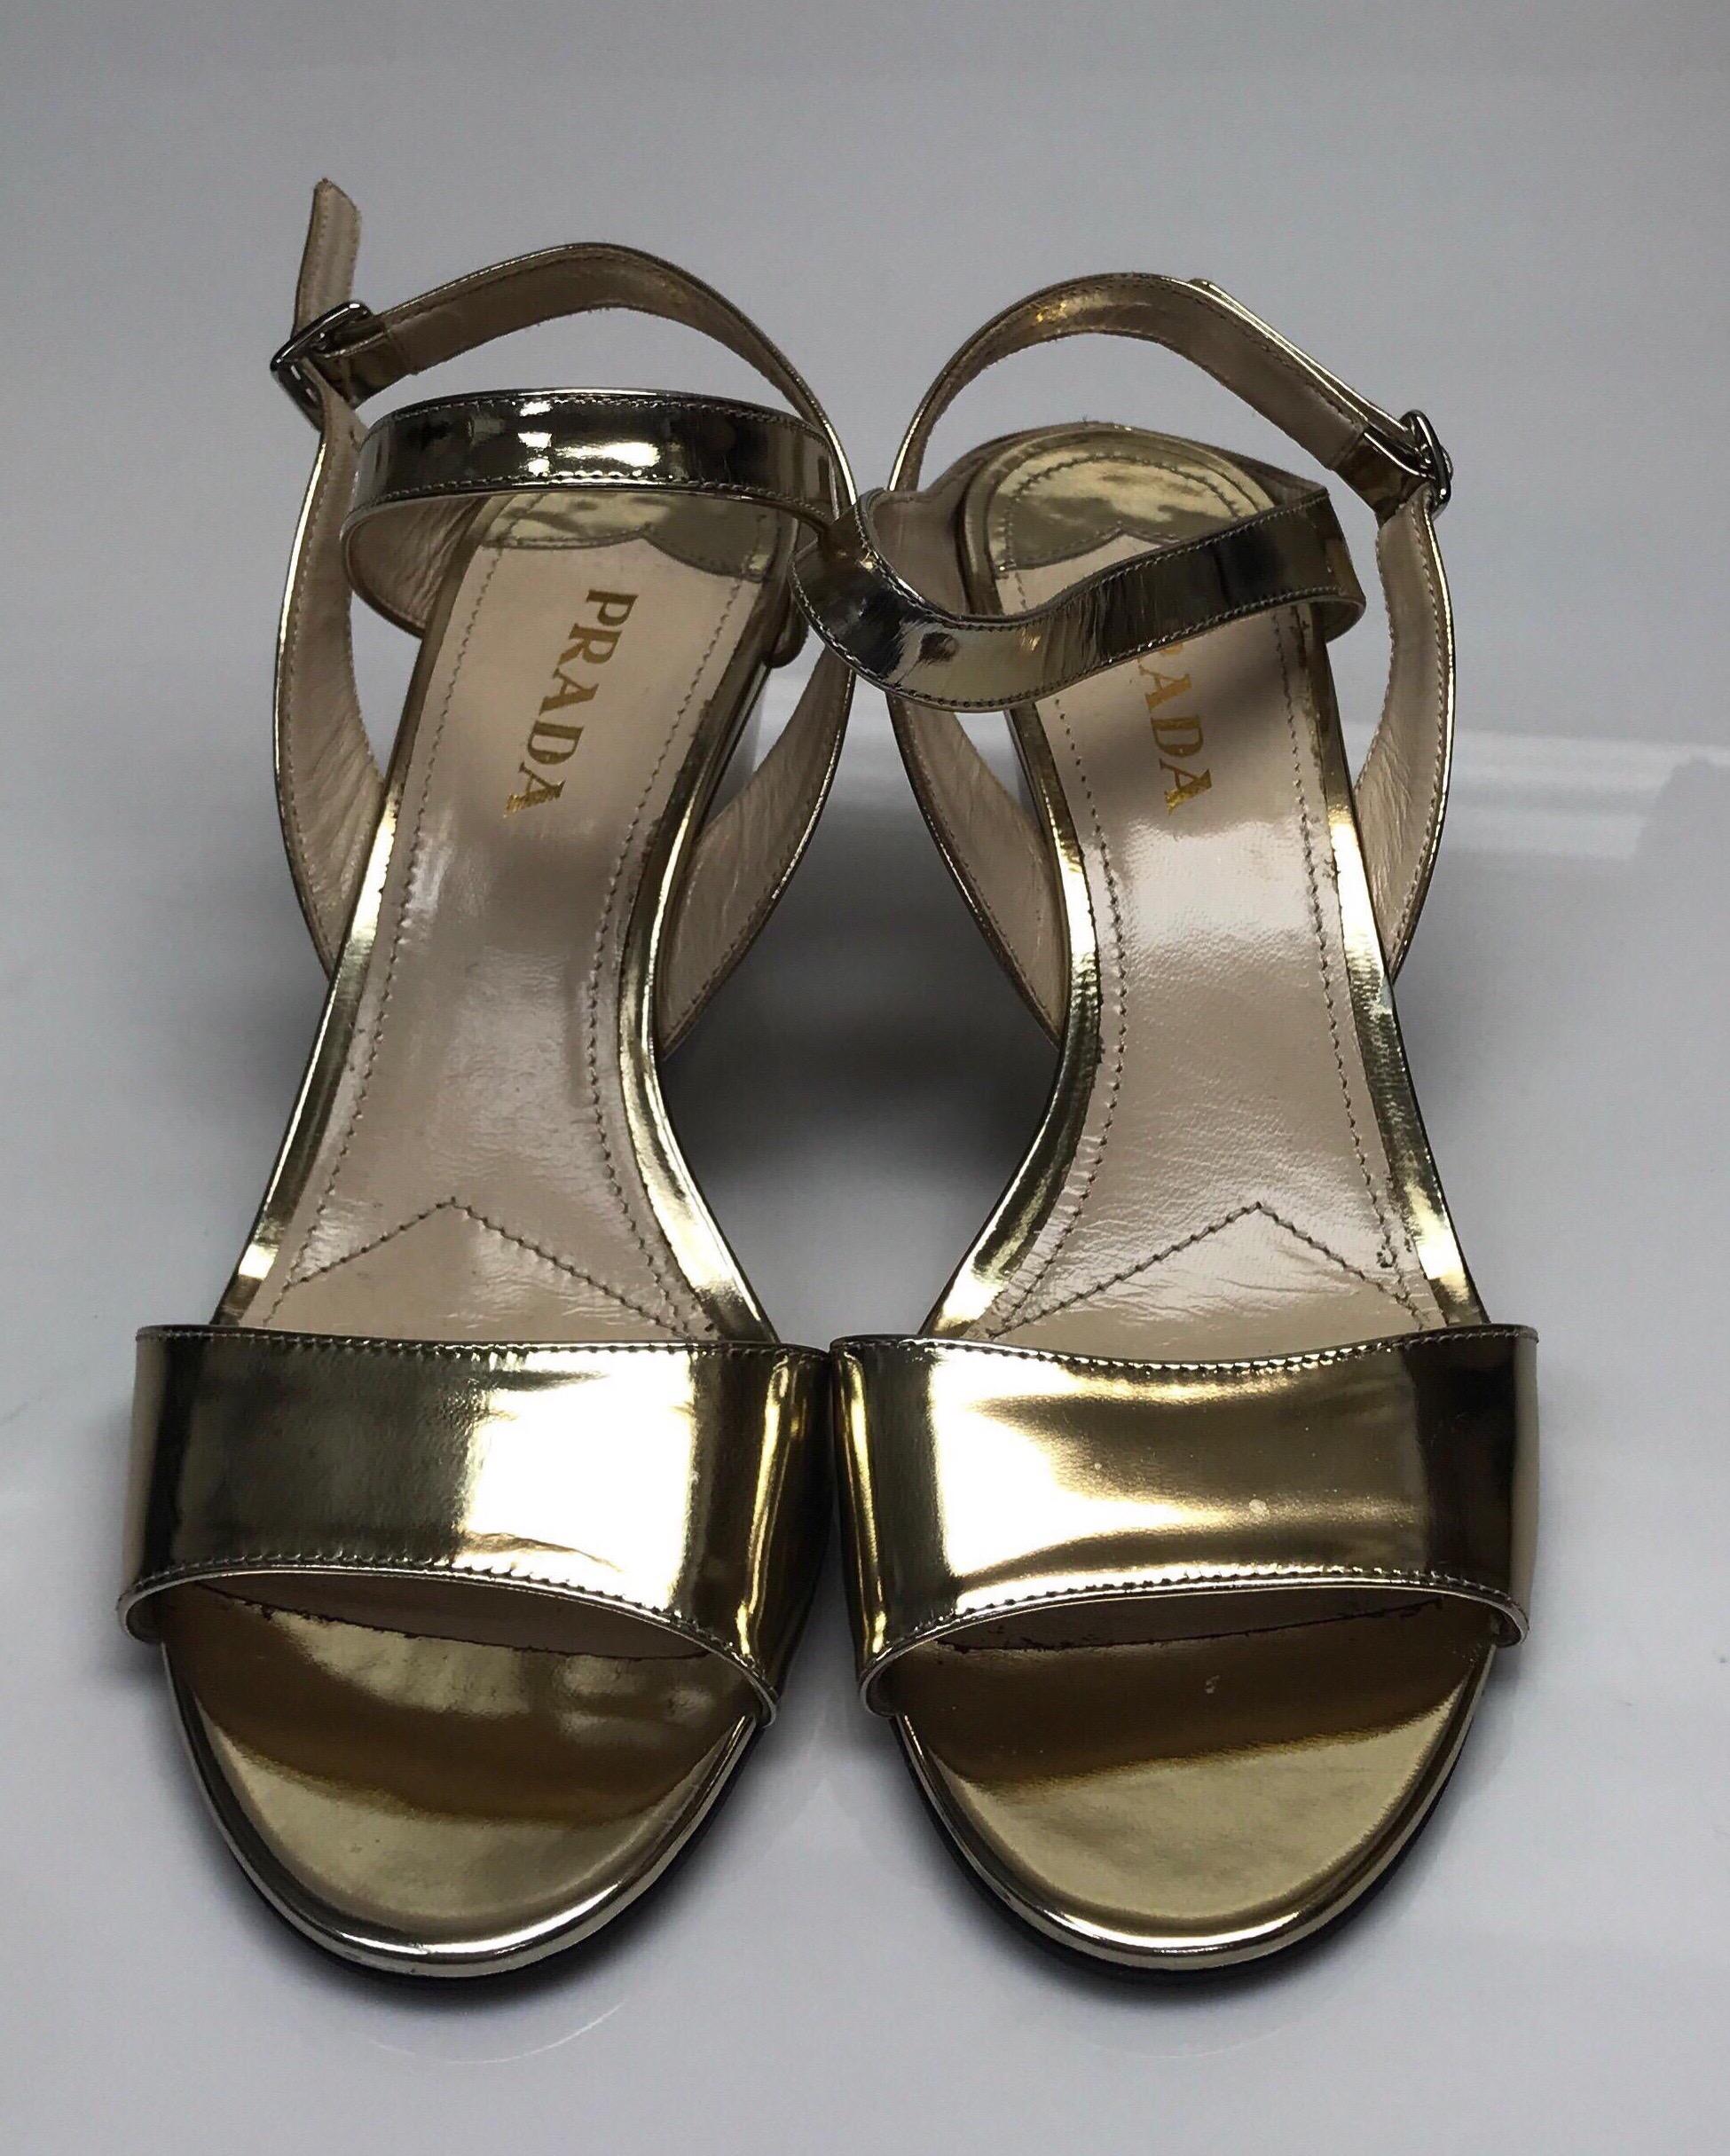 PRADA Gold Patent Leather Ankle Strap Wedge - 38. This beautiful Prada wedge is in good condition. There is minimal sign of use, including small smudges on the heel and wrinkling of the strap. This wedge is made of gold patent leather and has an